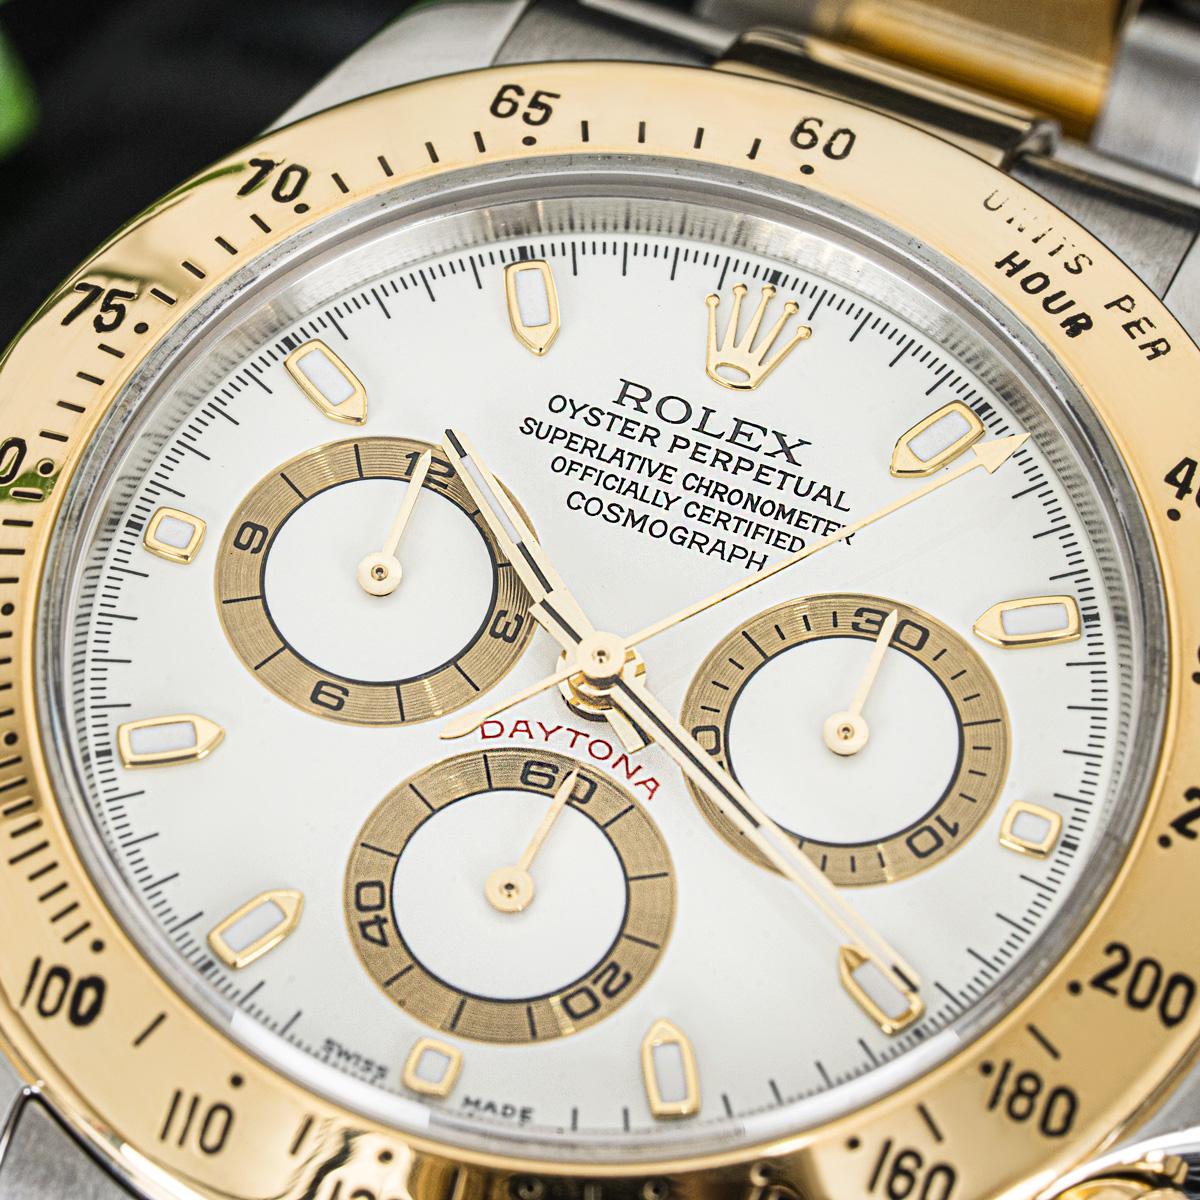 A Daytona in Oystersteel and yellow gold by Rolex. Featuring a distinctive cream dial with an engraved tachymetric scale, three chronograph counters and pushers; the Daytona was designed to be the ultimate timing tool for endurance racing